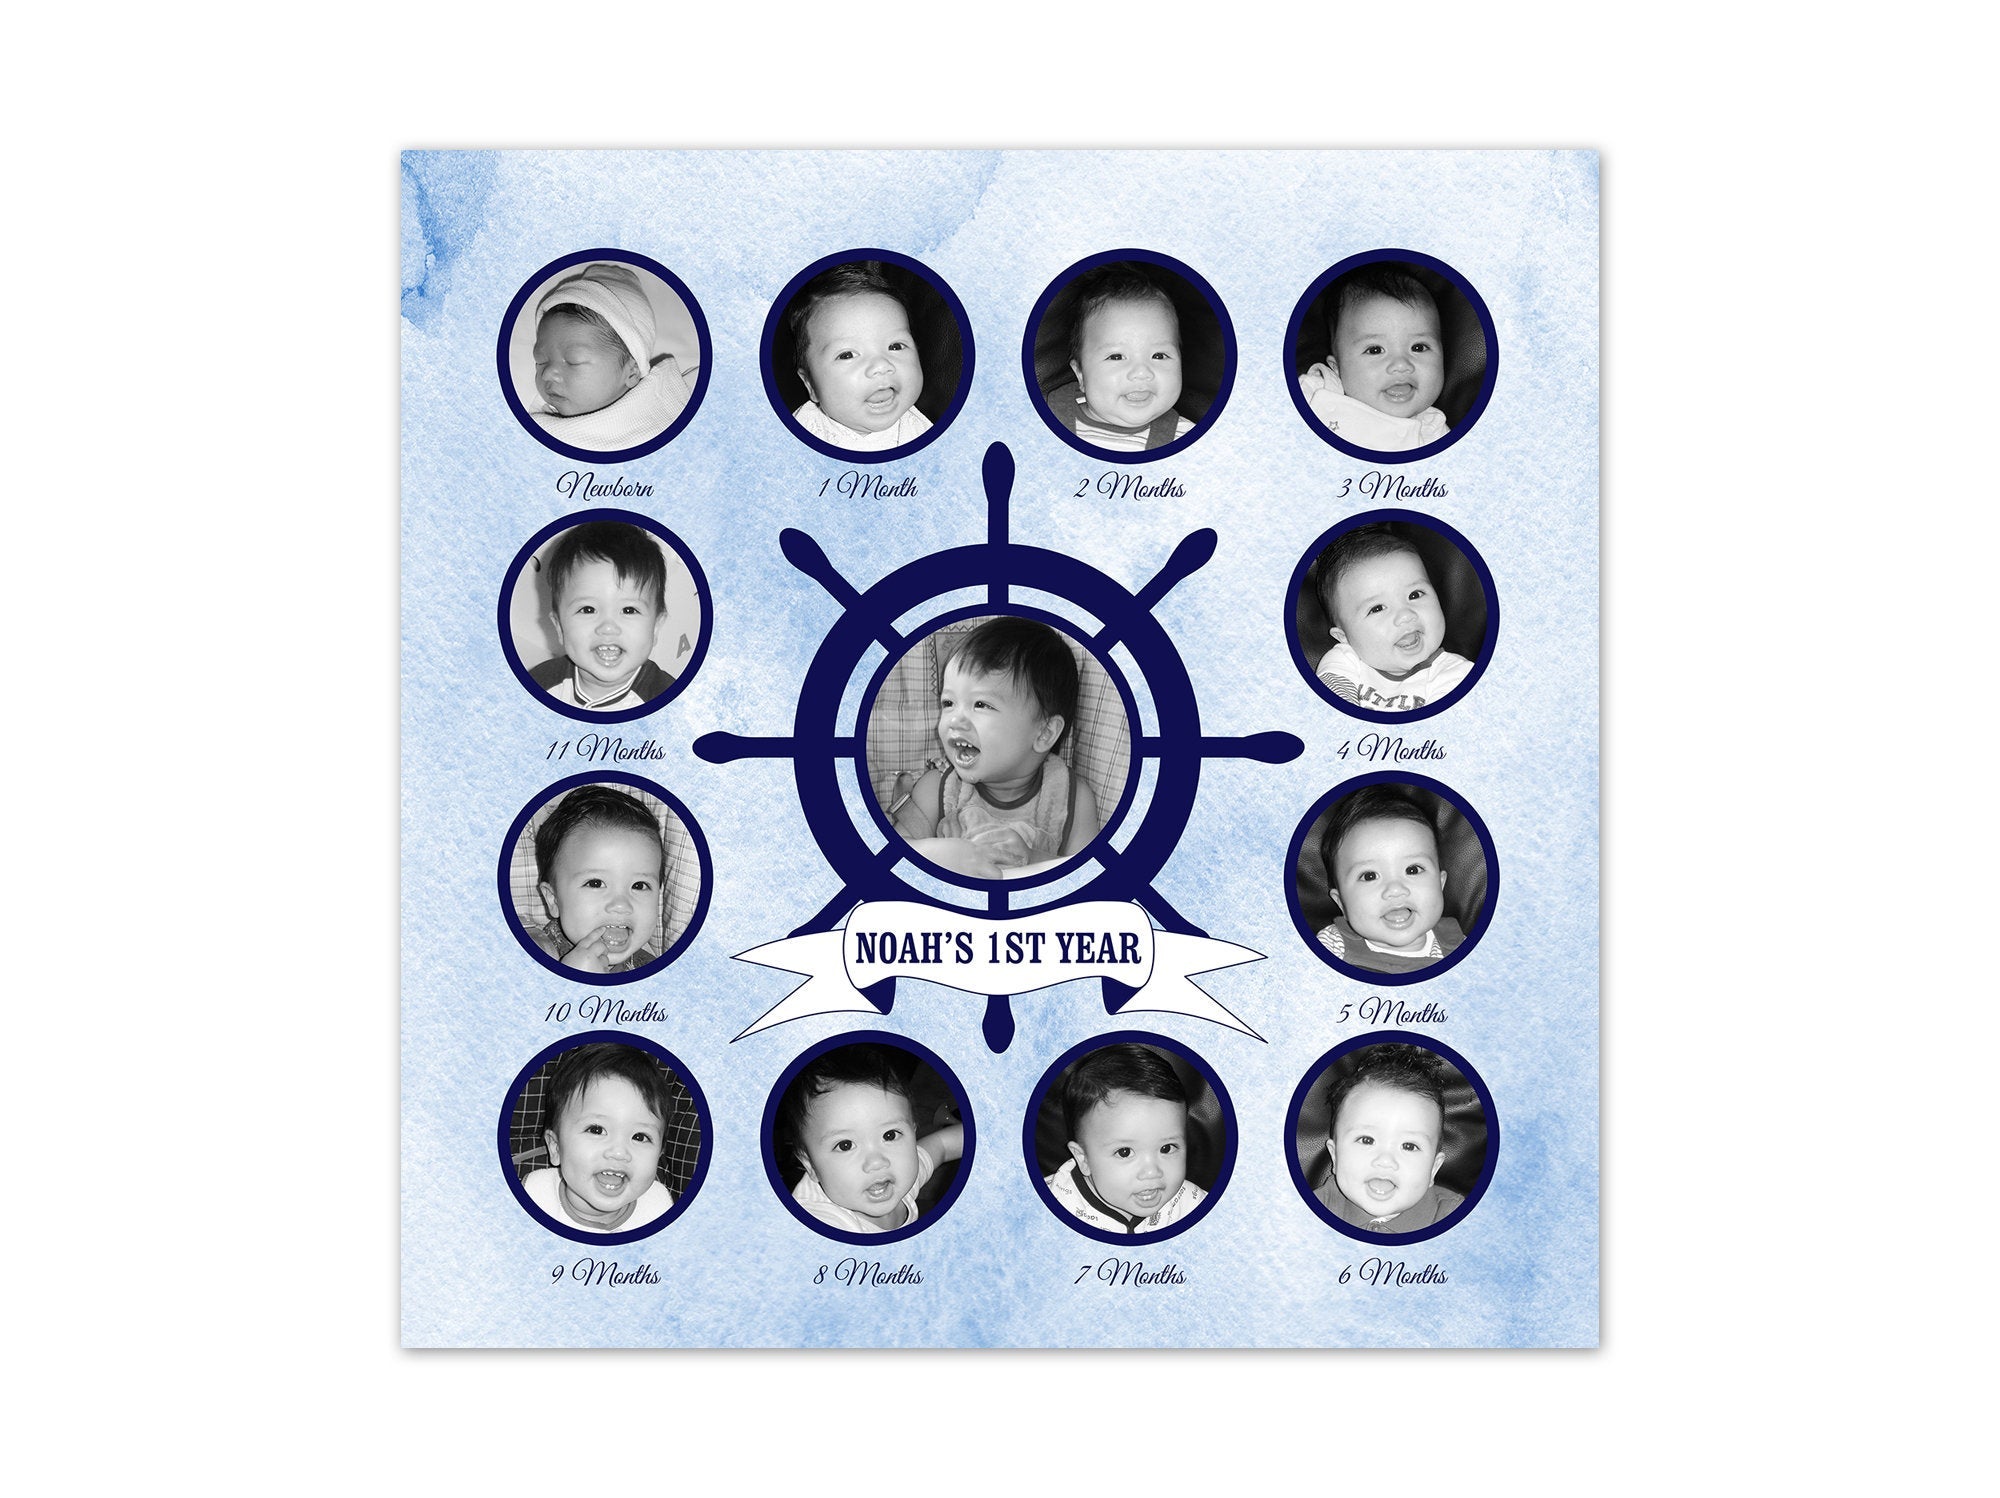 My First Year Pictures Collage, Blue Nautical Nursery CANVAS, Baby Keepsake Decor, 1st Birthday Gift, Playroom Decor, Nautical Baby - FR21